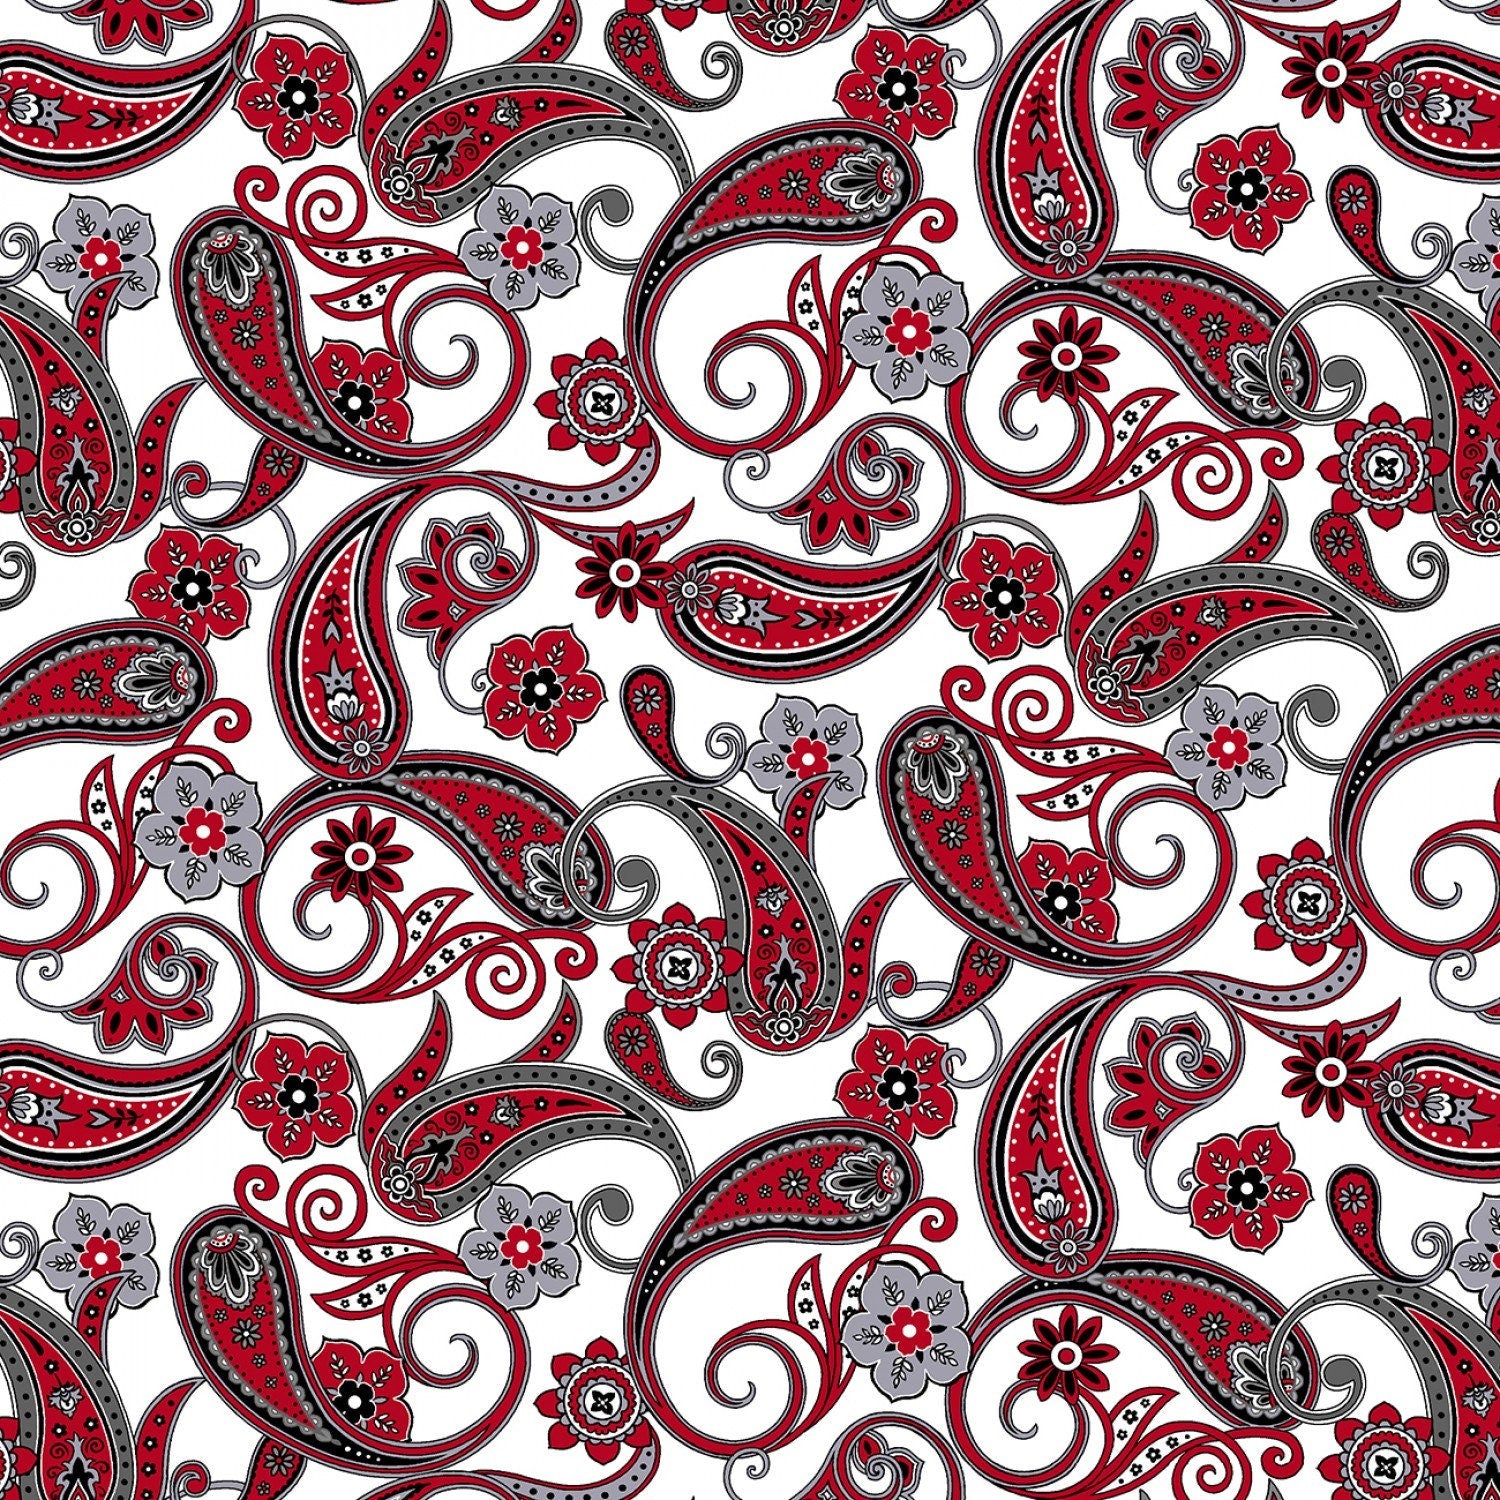 Black White and Red Hot Paisley Fabric, Henry Glass 2444-02, Quilter's Cotton, Paisley Apparel Fabric, By the Yard